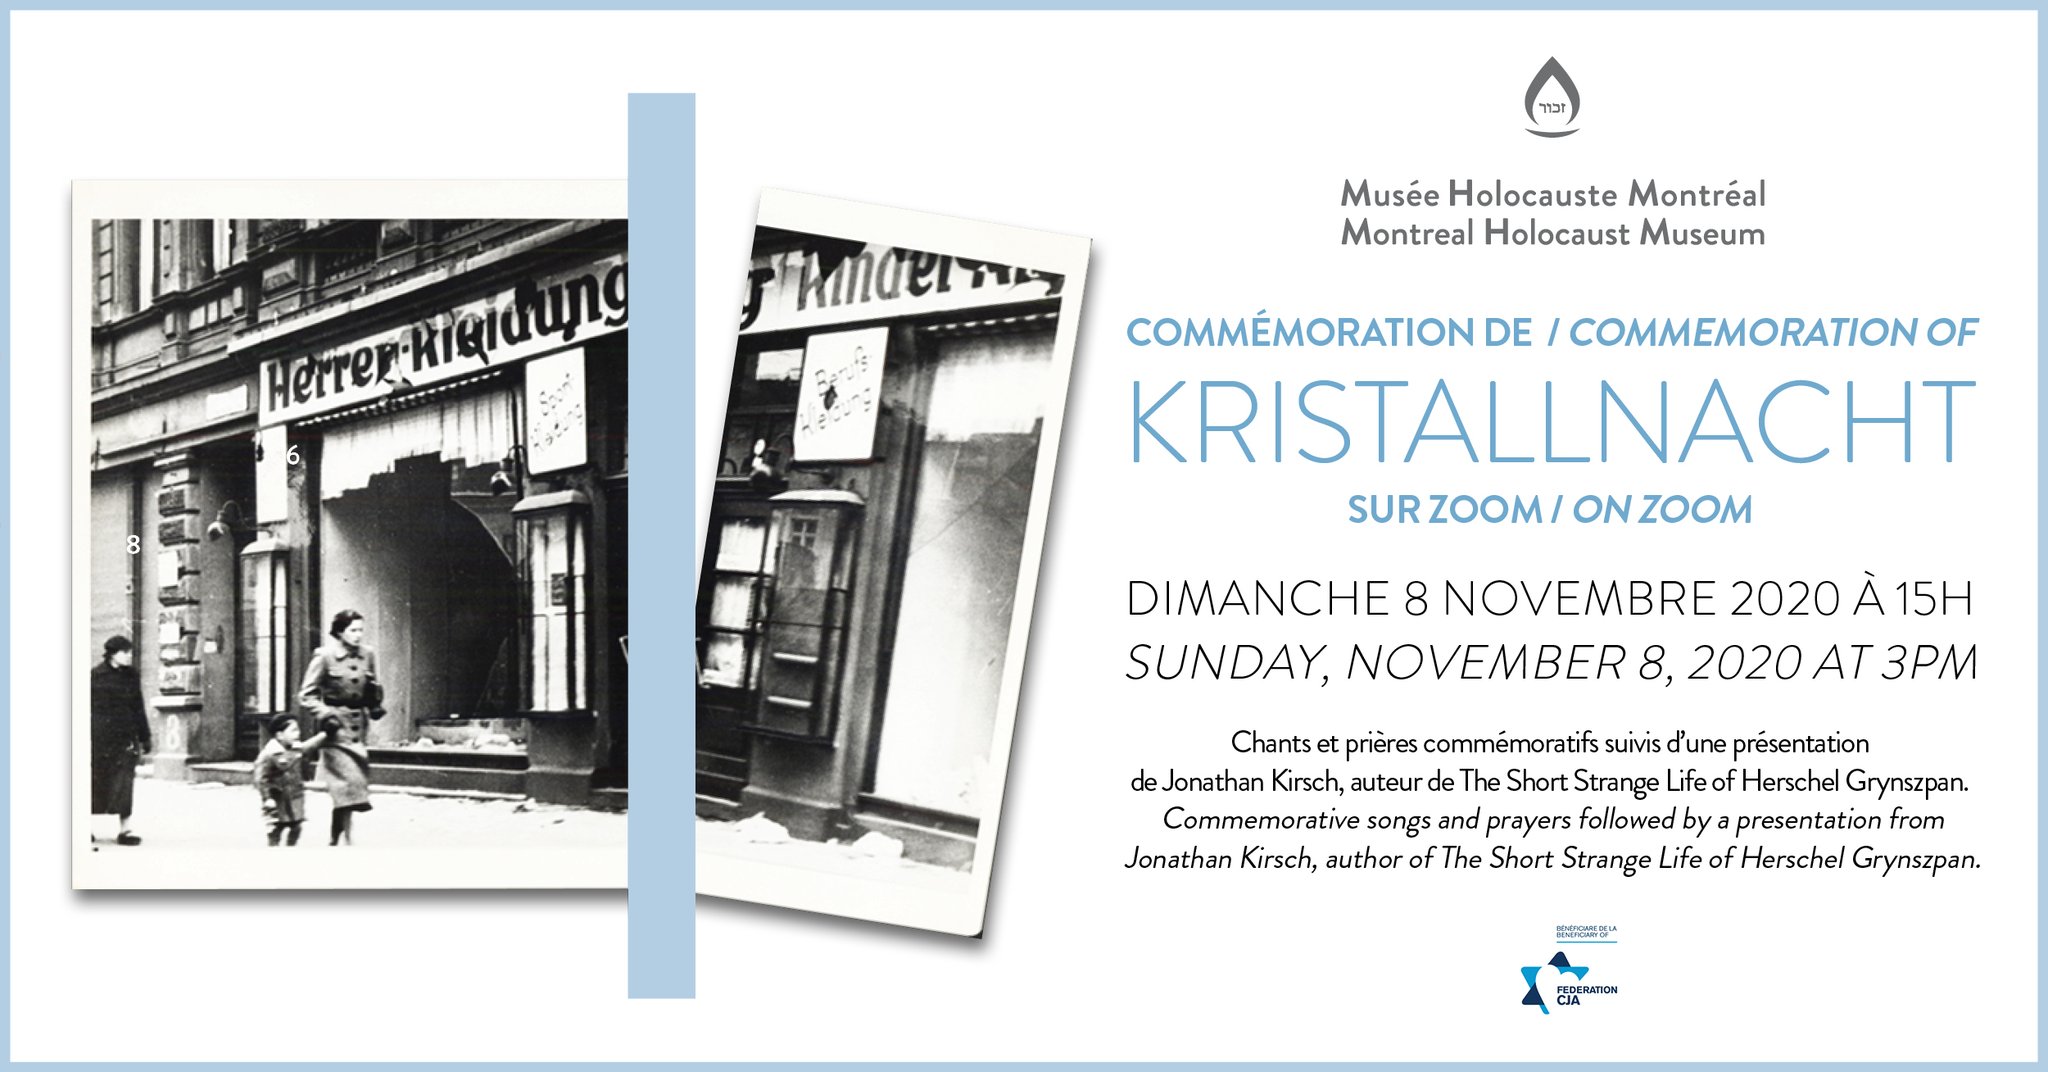 Musee Holocauste Mtl Join Us On November 8 At 3 Pm As We Commemorate Kristallnacht The Night Of Broken Glass Alongside Jonathan Kirsch Author Of The Short Strange Life Of